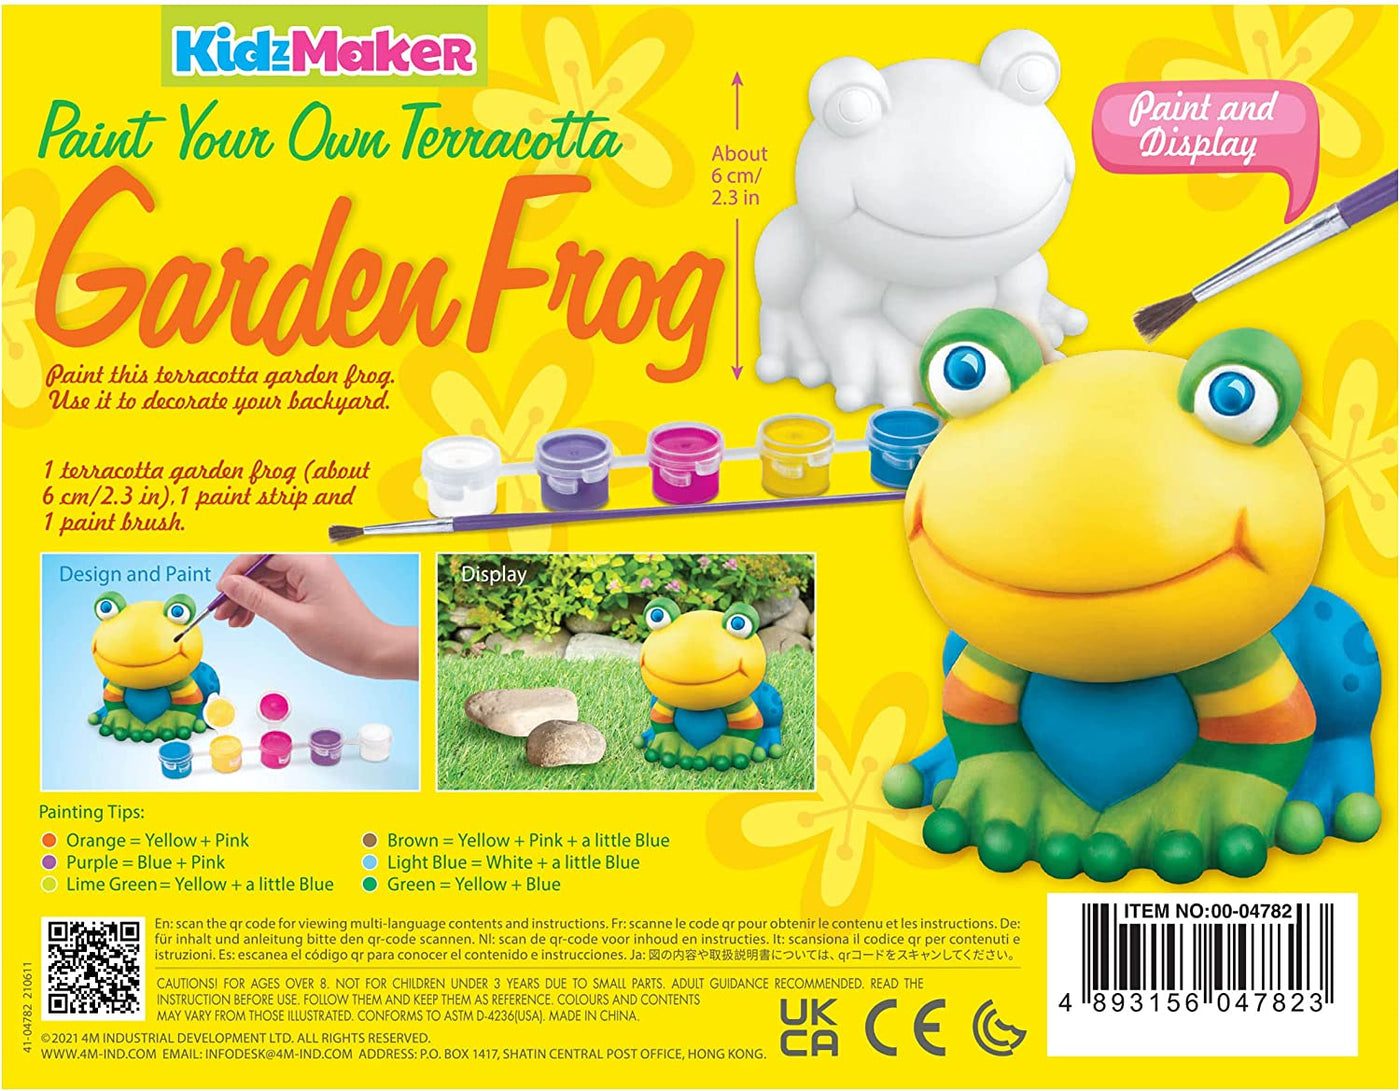 Freddie The Garden Frog | Paint Your Own